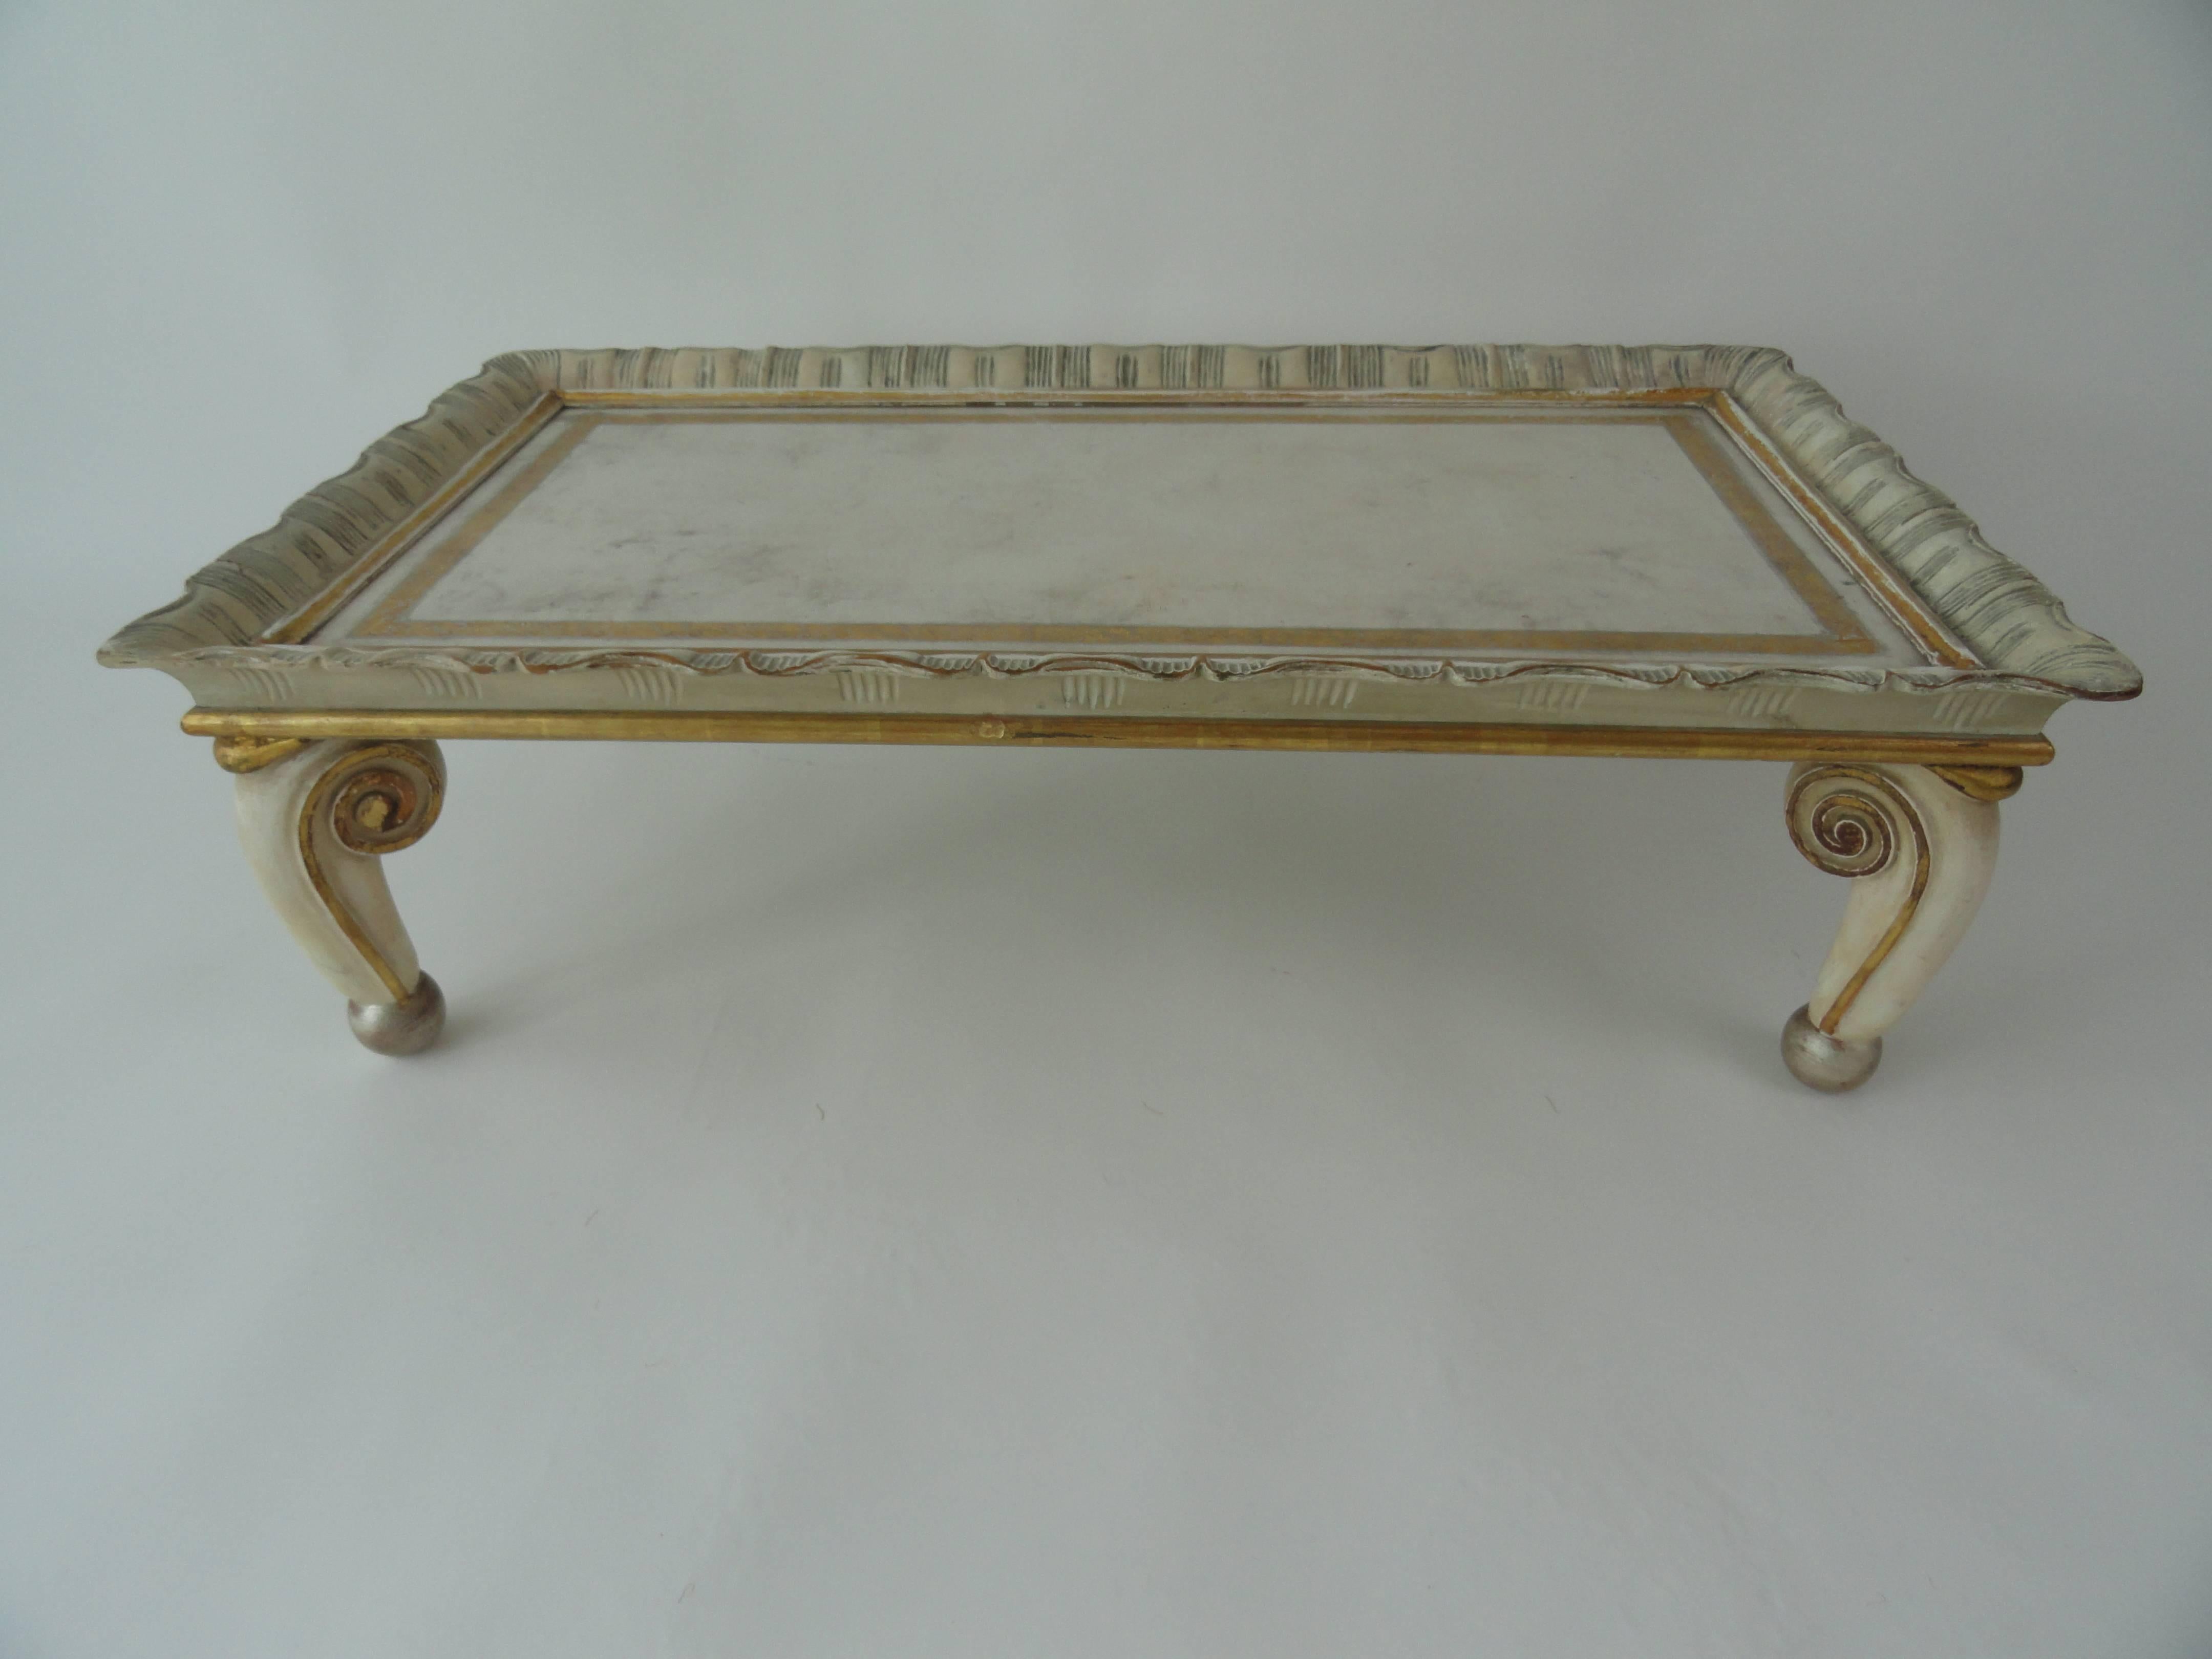 Signed and numbered Maison Jansen tray, circa 1952.
Wood carved tray table with original paint, gilt and tooled leather top. Wear consistent with age.
Very rare and unusual.
Measures: 35